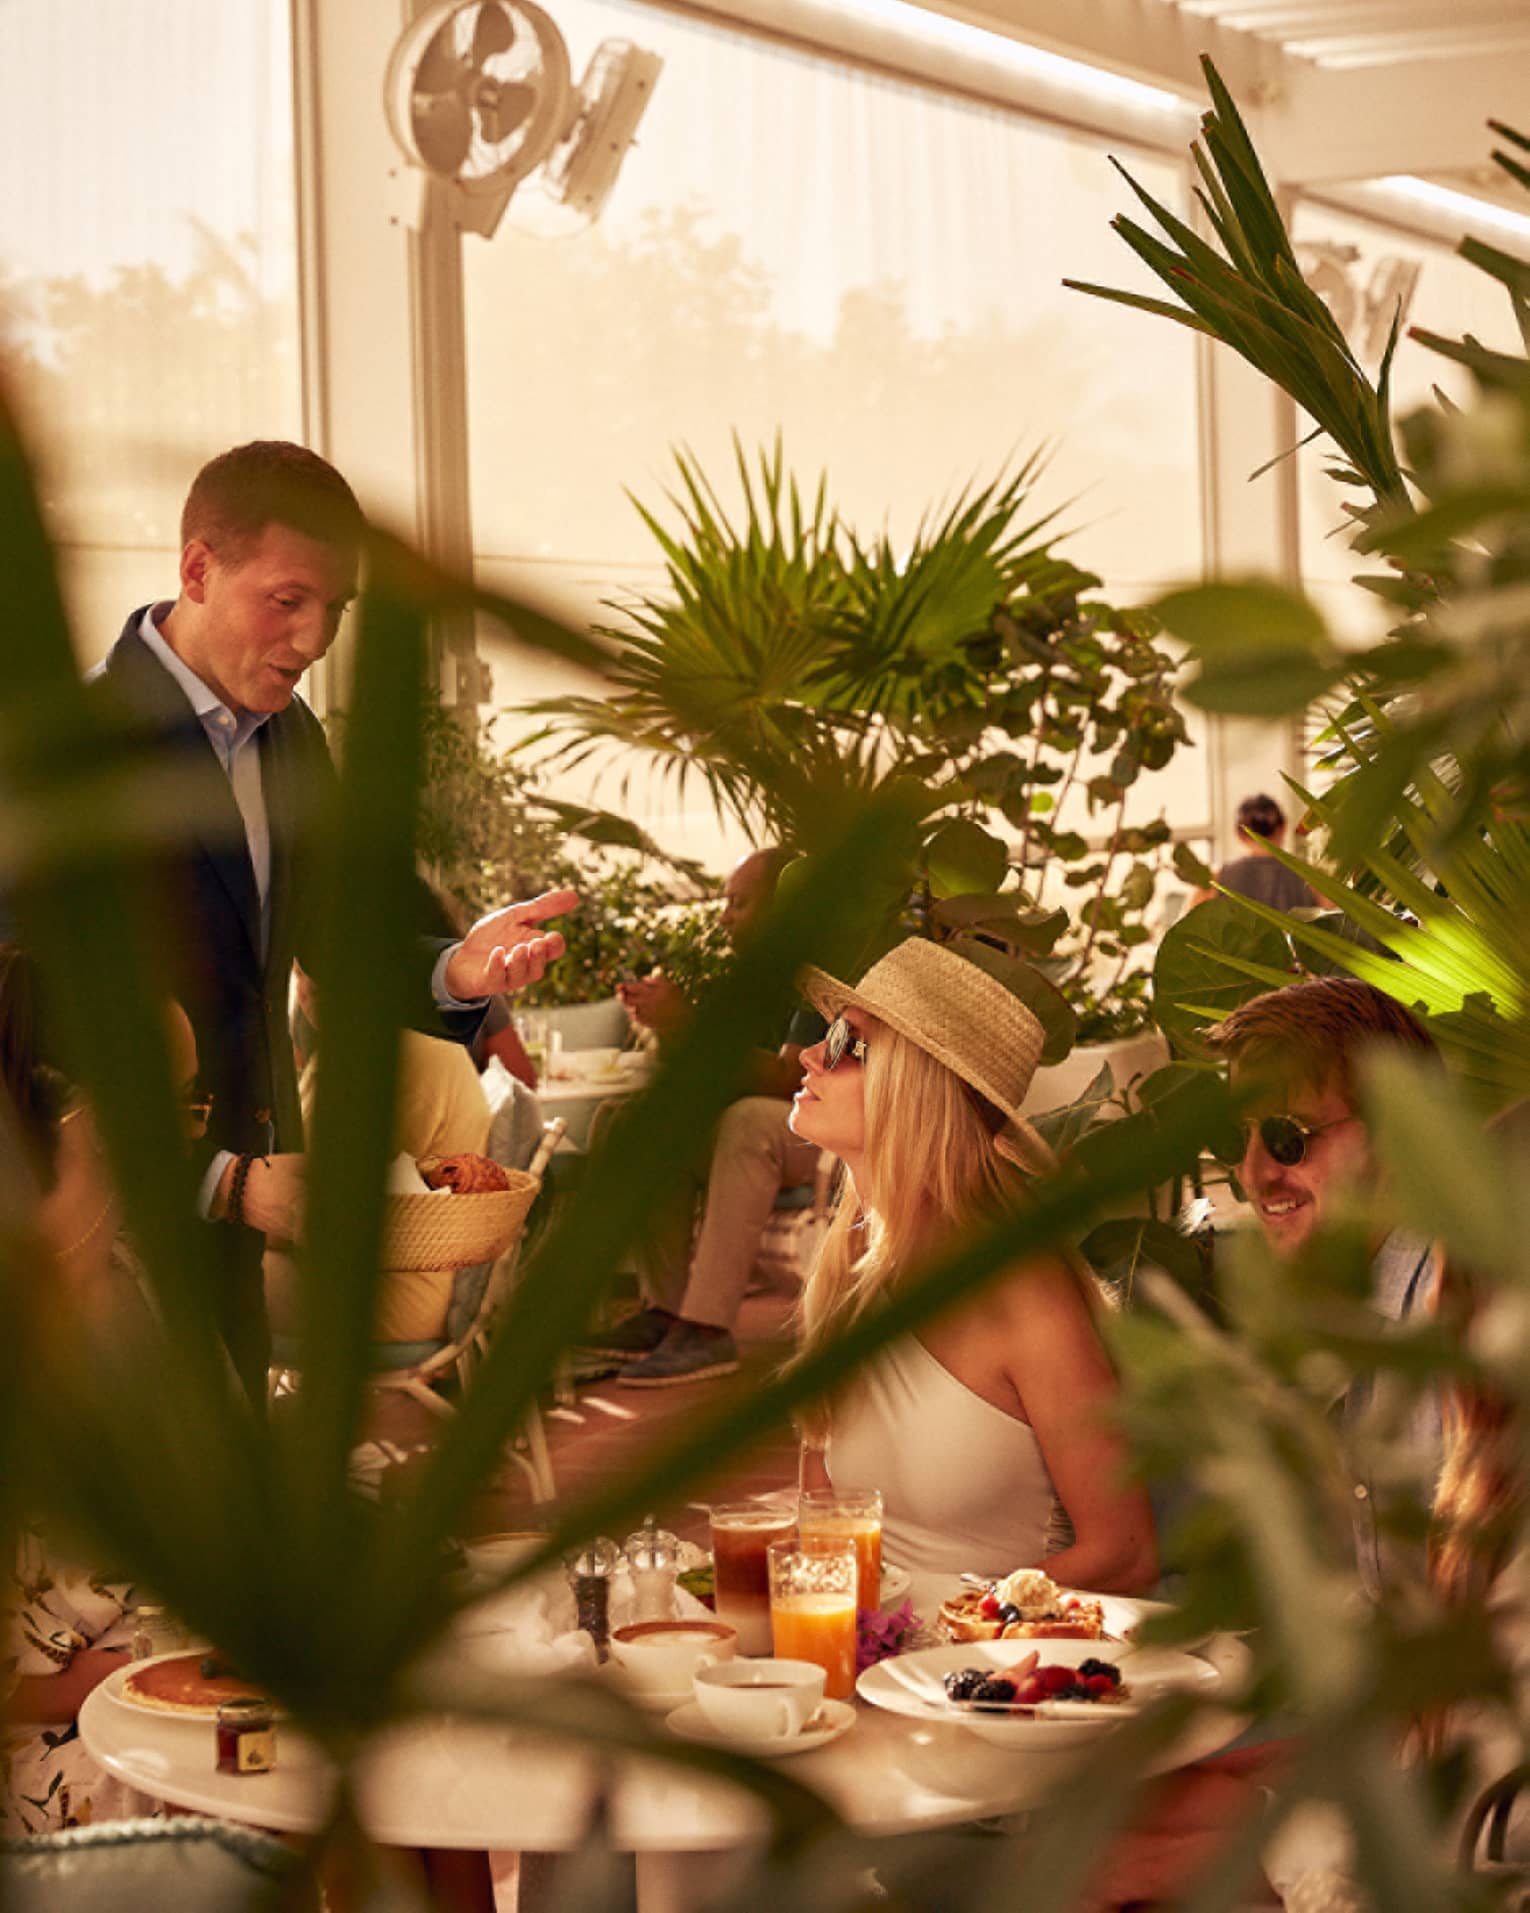 A woman being served food in a covered eating area with plants.